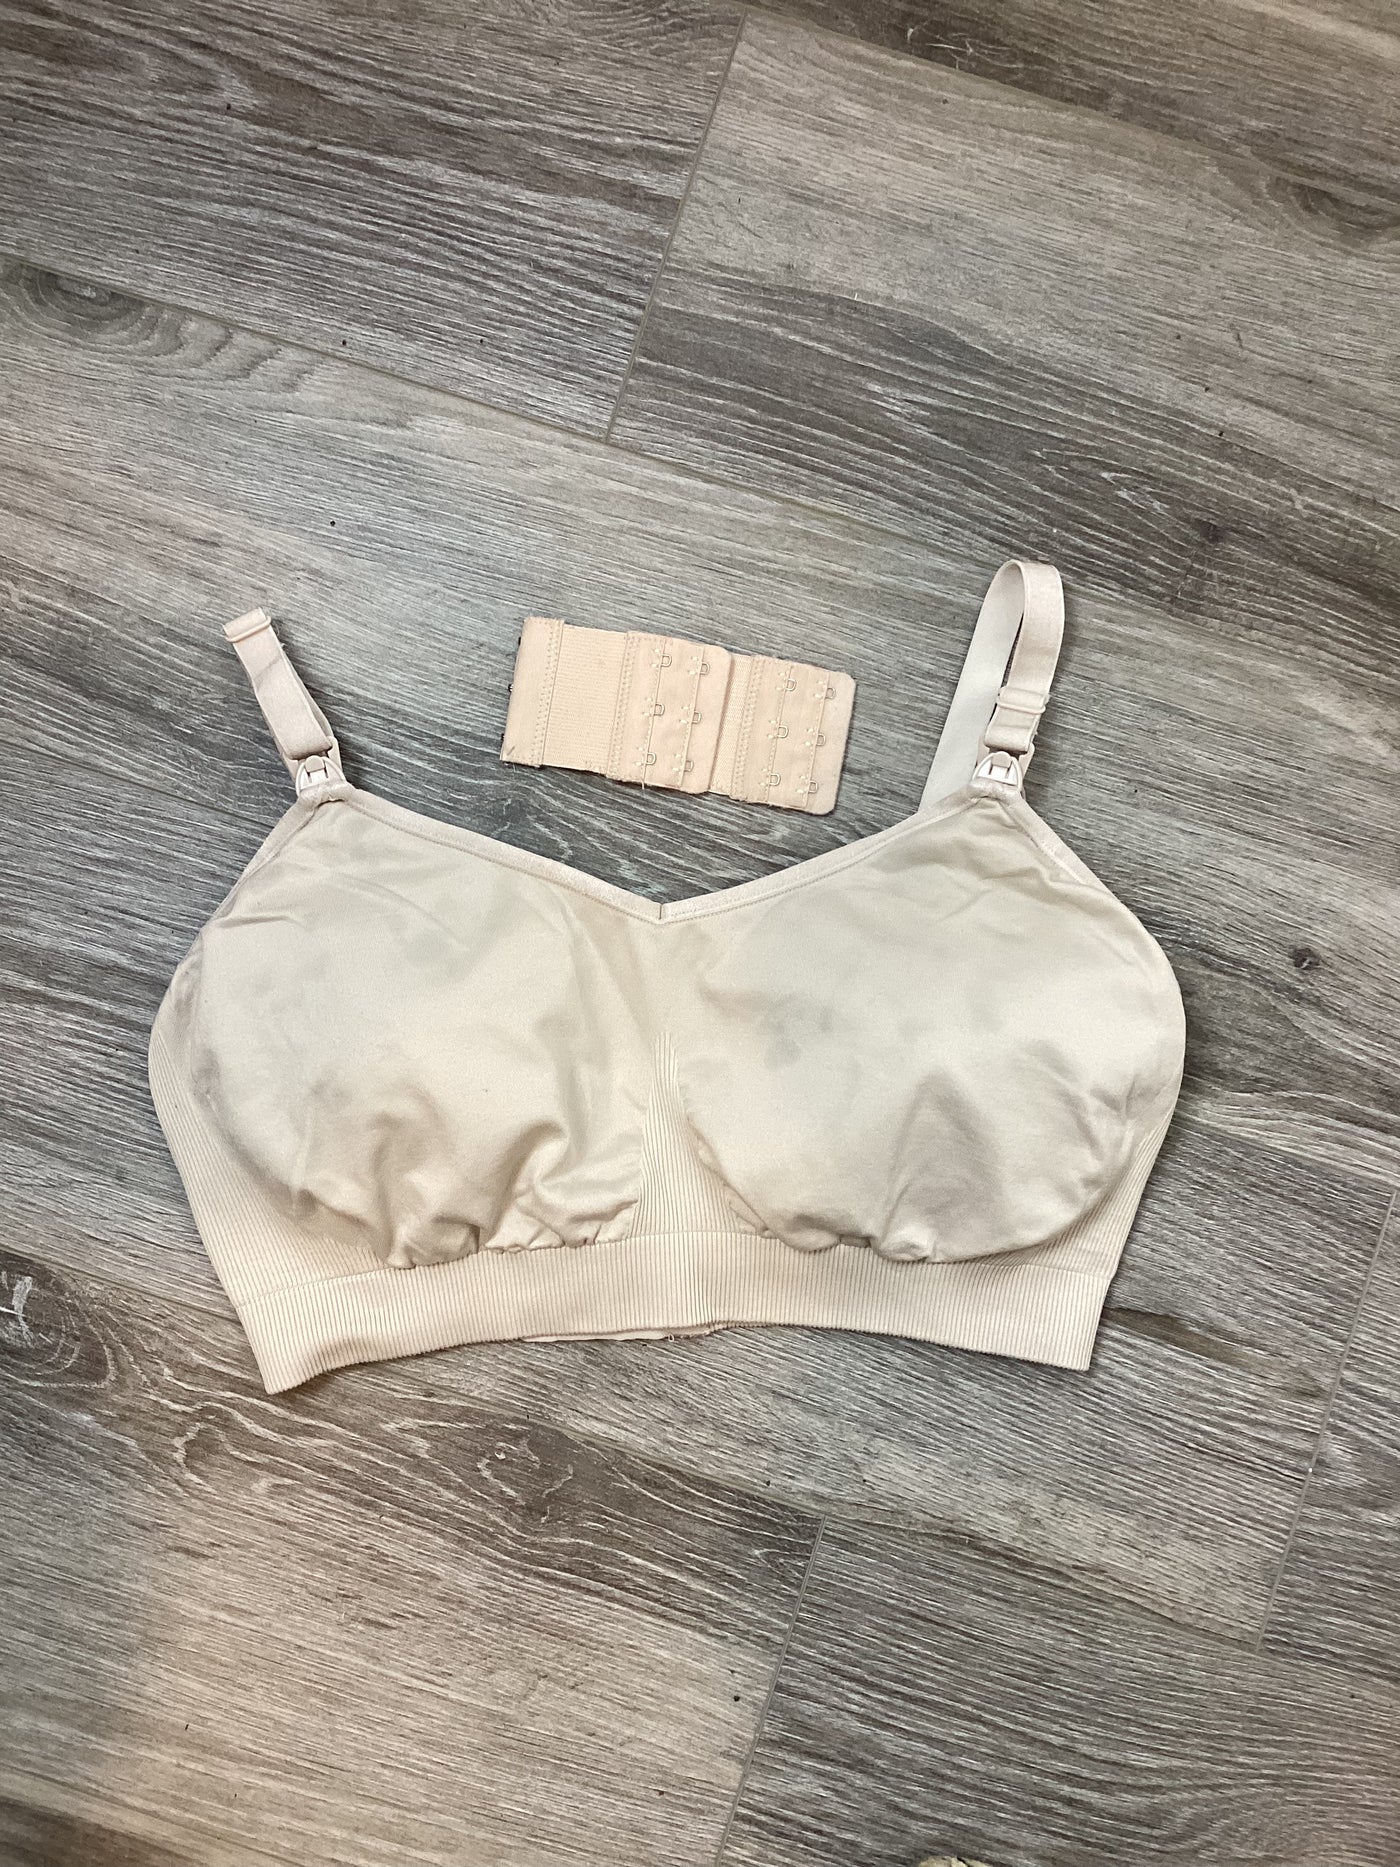 M&S Mum nude seamless full cup nursing bra with 2 x extenders - Size L (Approx UK 14)